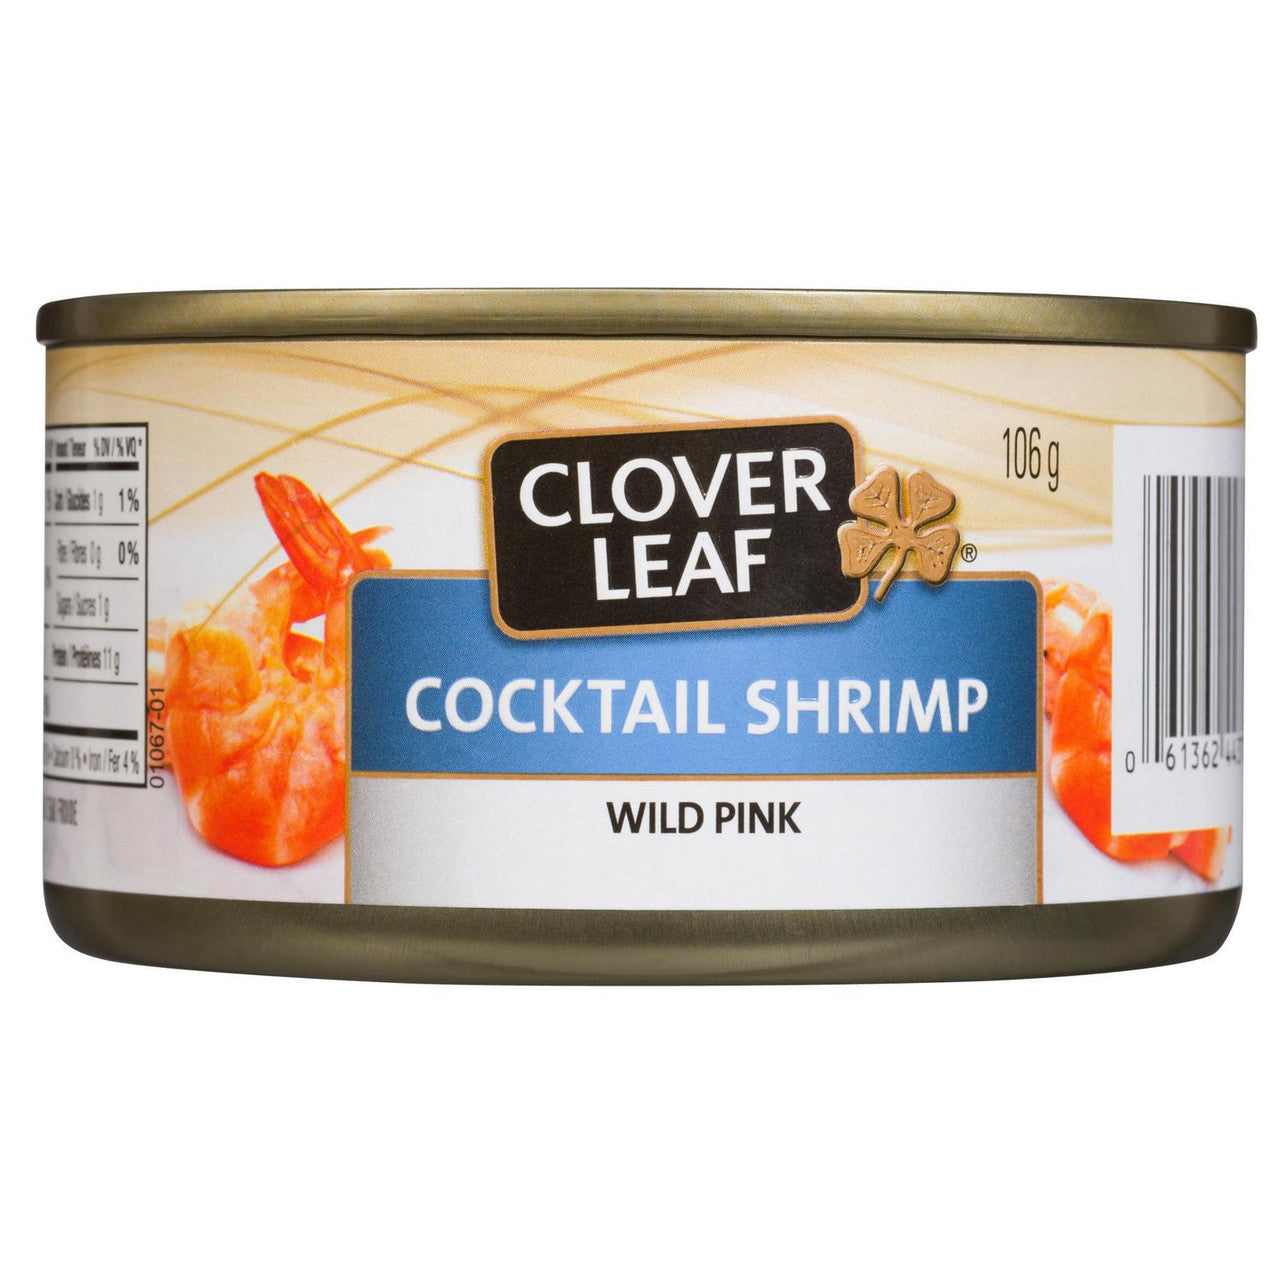 Clover Leaf Wild Cocktail Shrimp, 106g/3.7 oz., (Imported from Canada)